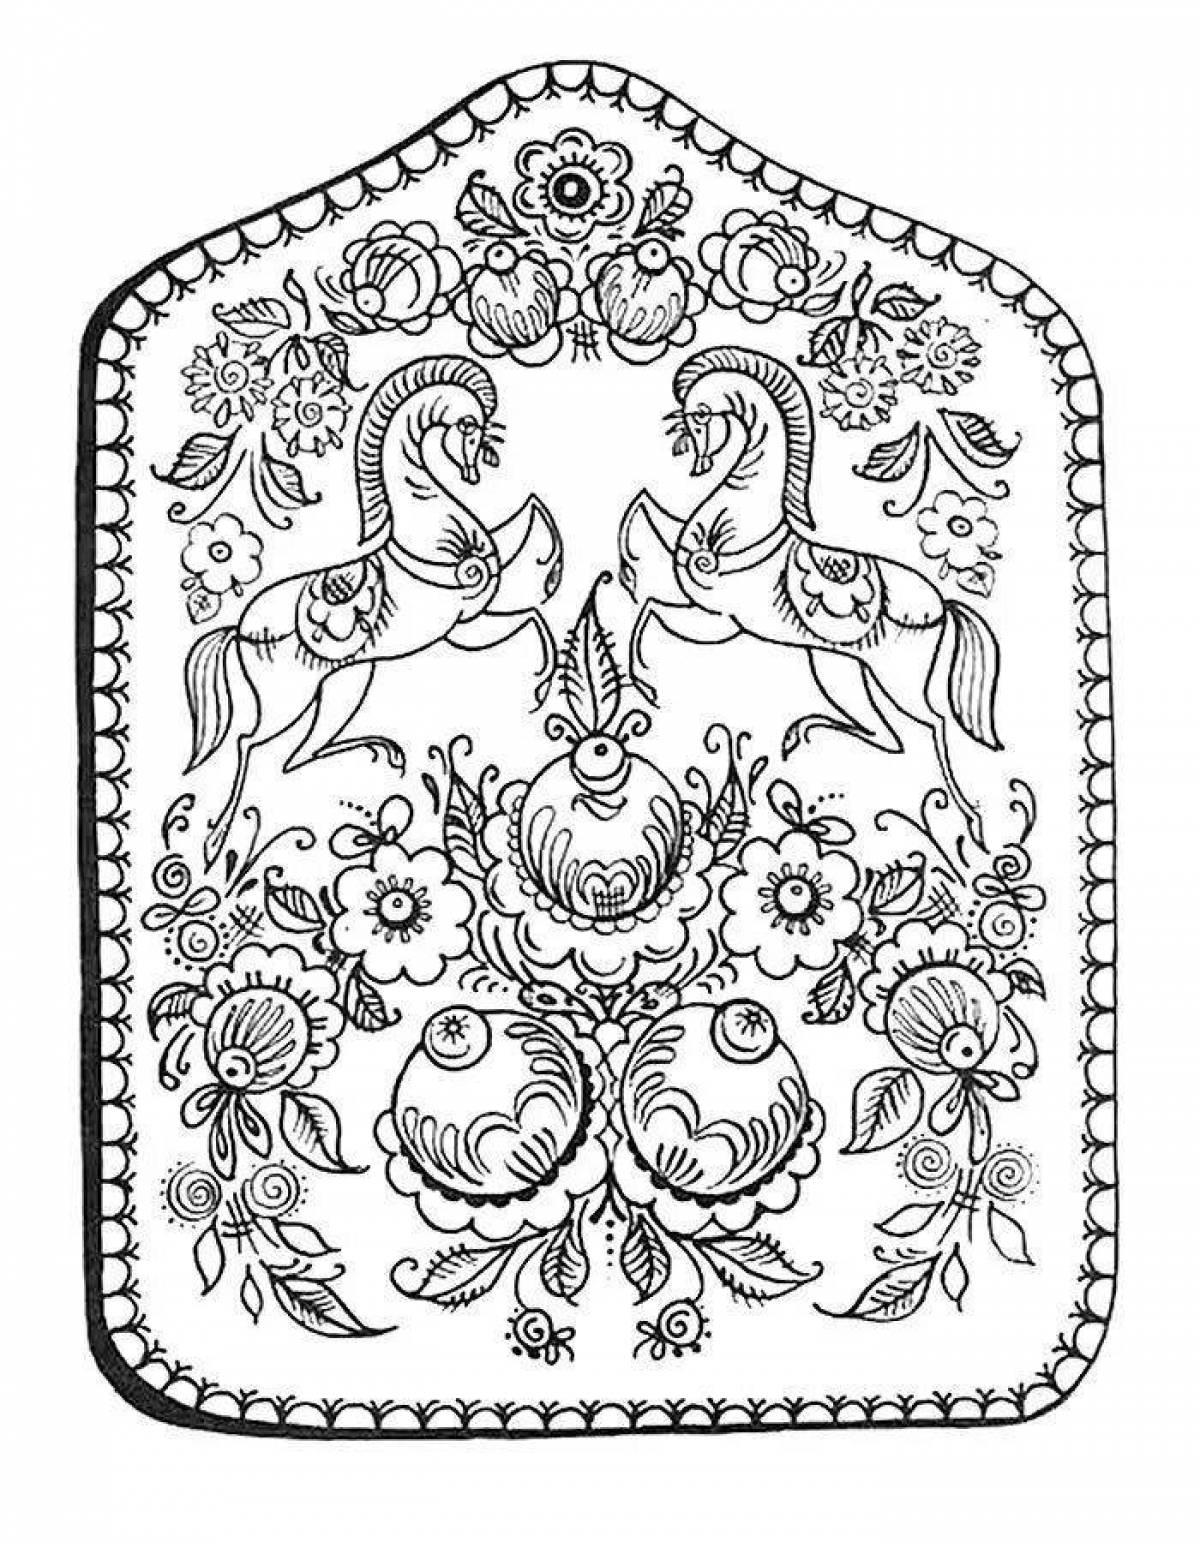 Coloring page with unusual folk pattern